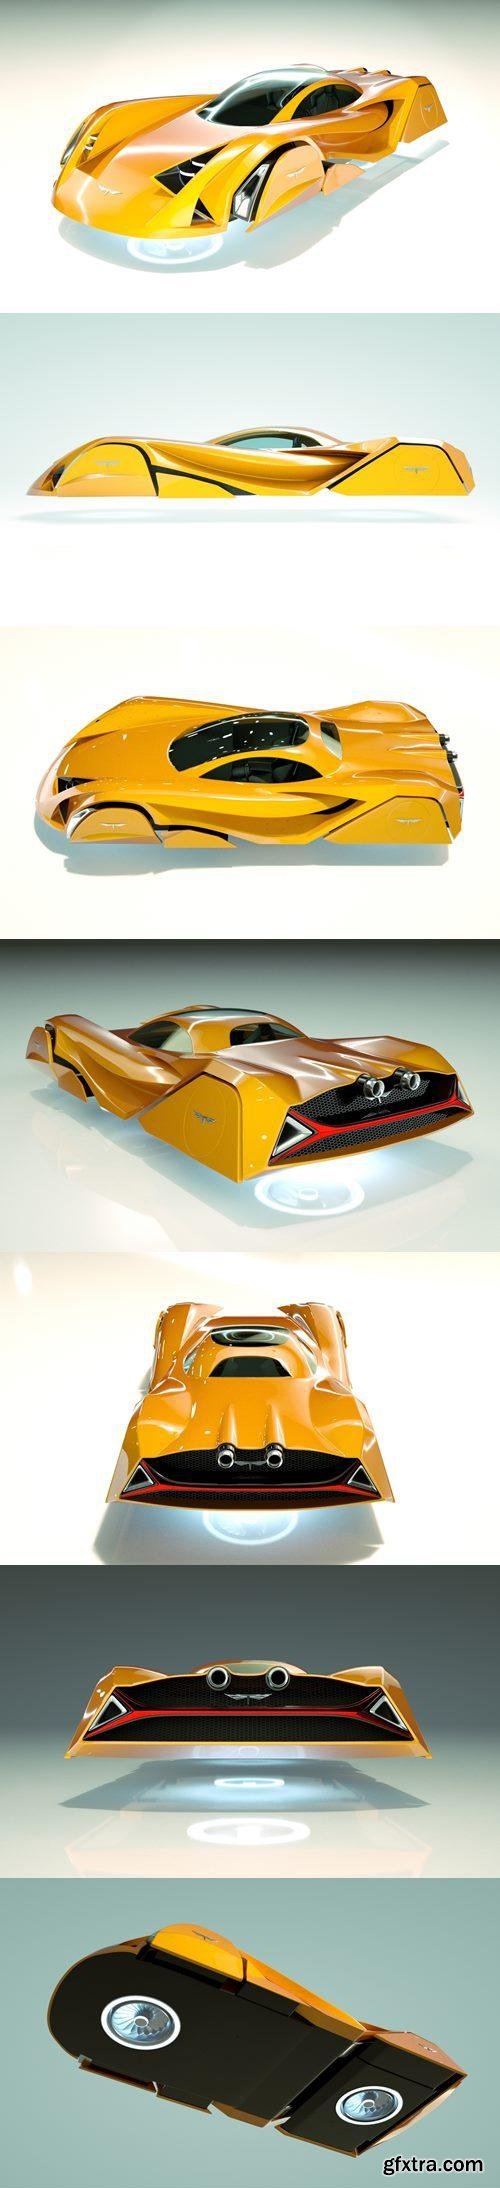 T-Hover Car 07 – Cheap & Cool series - 3D Model